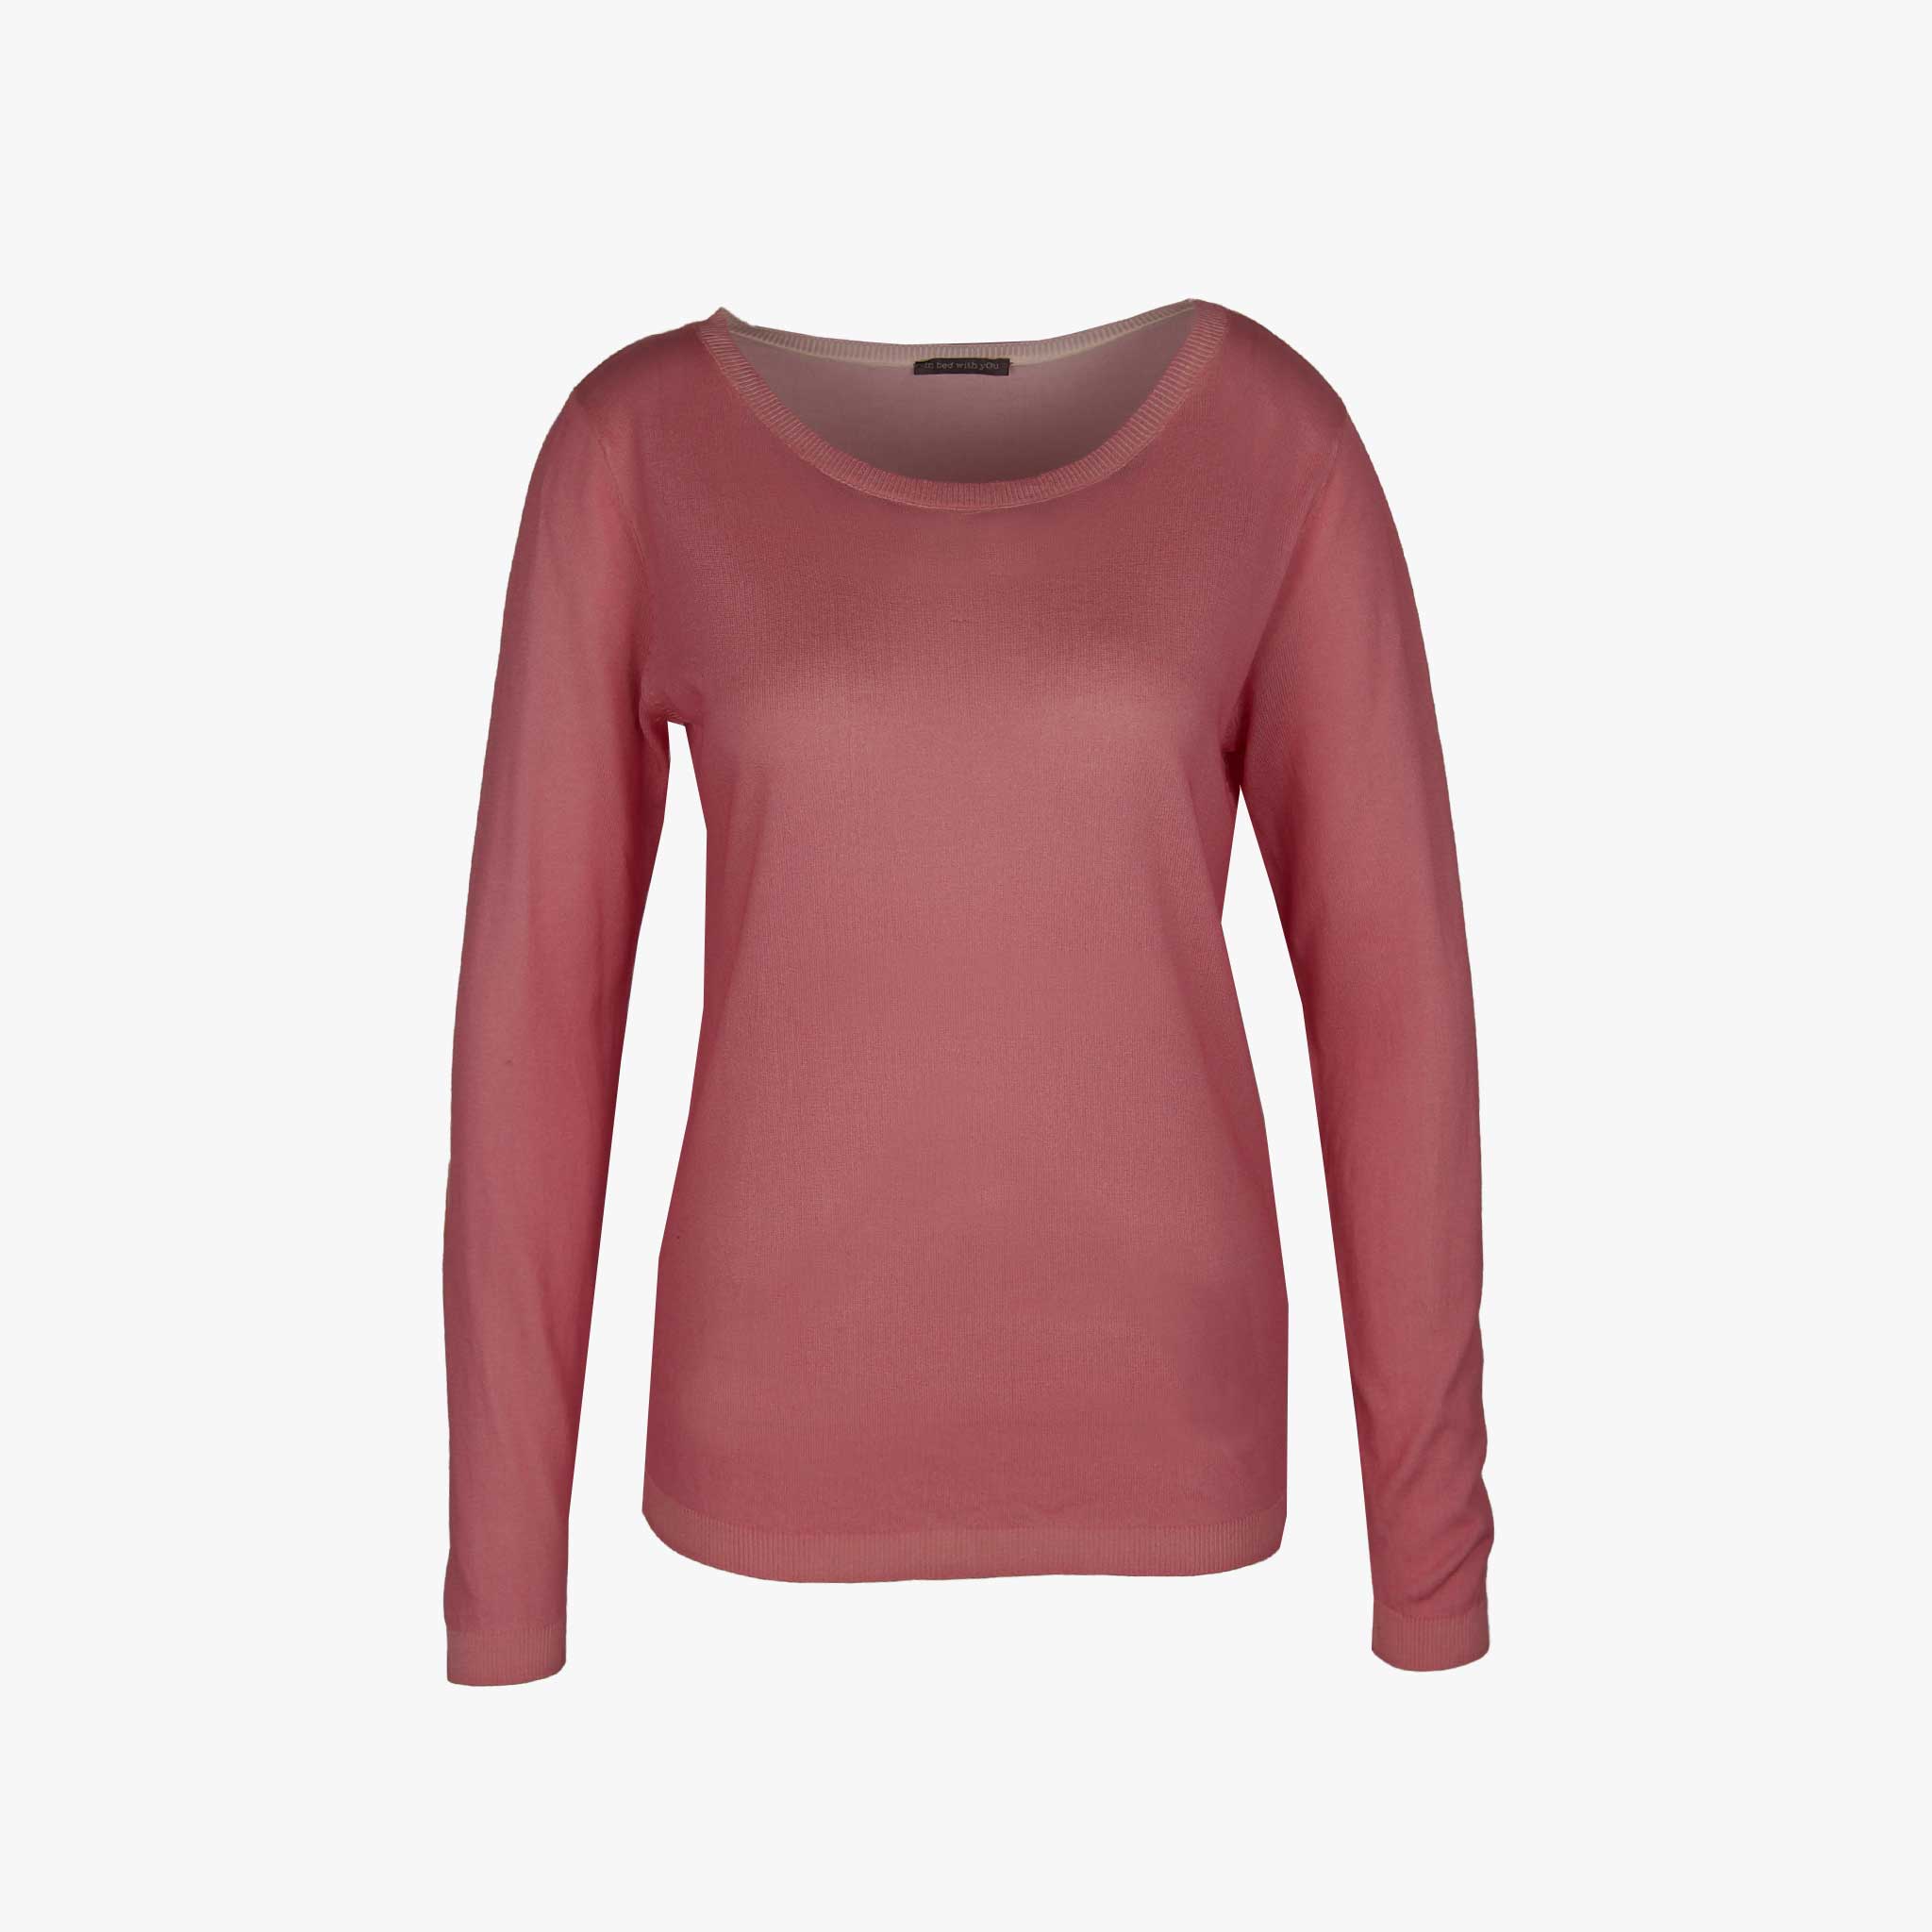 In bed with You Pulli uni | rose